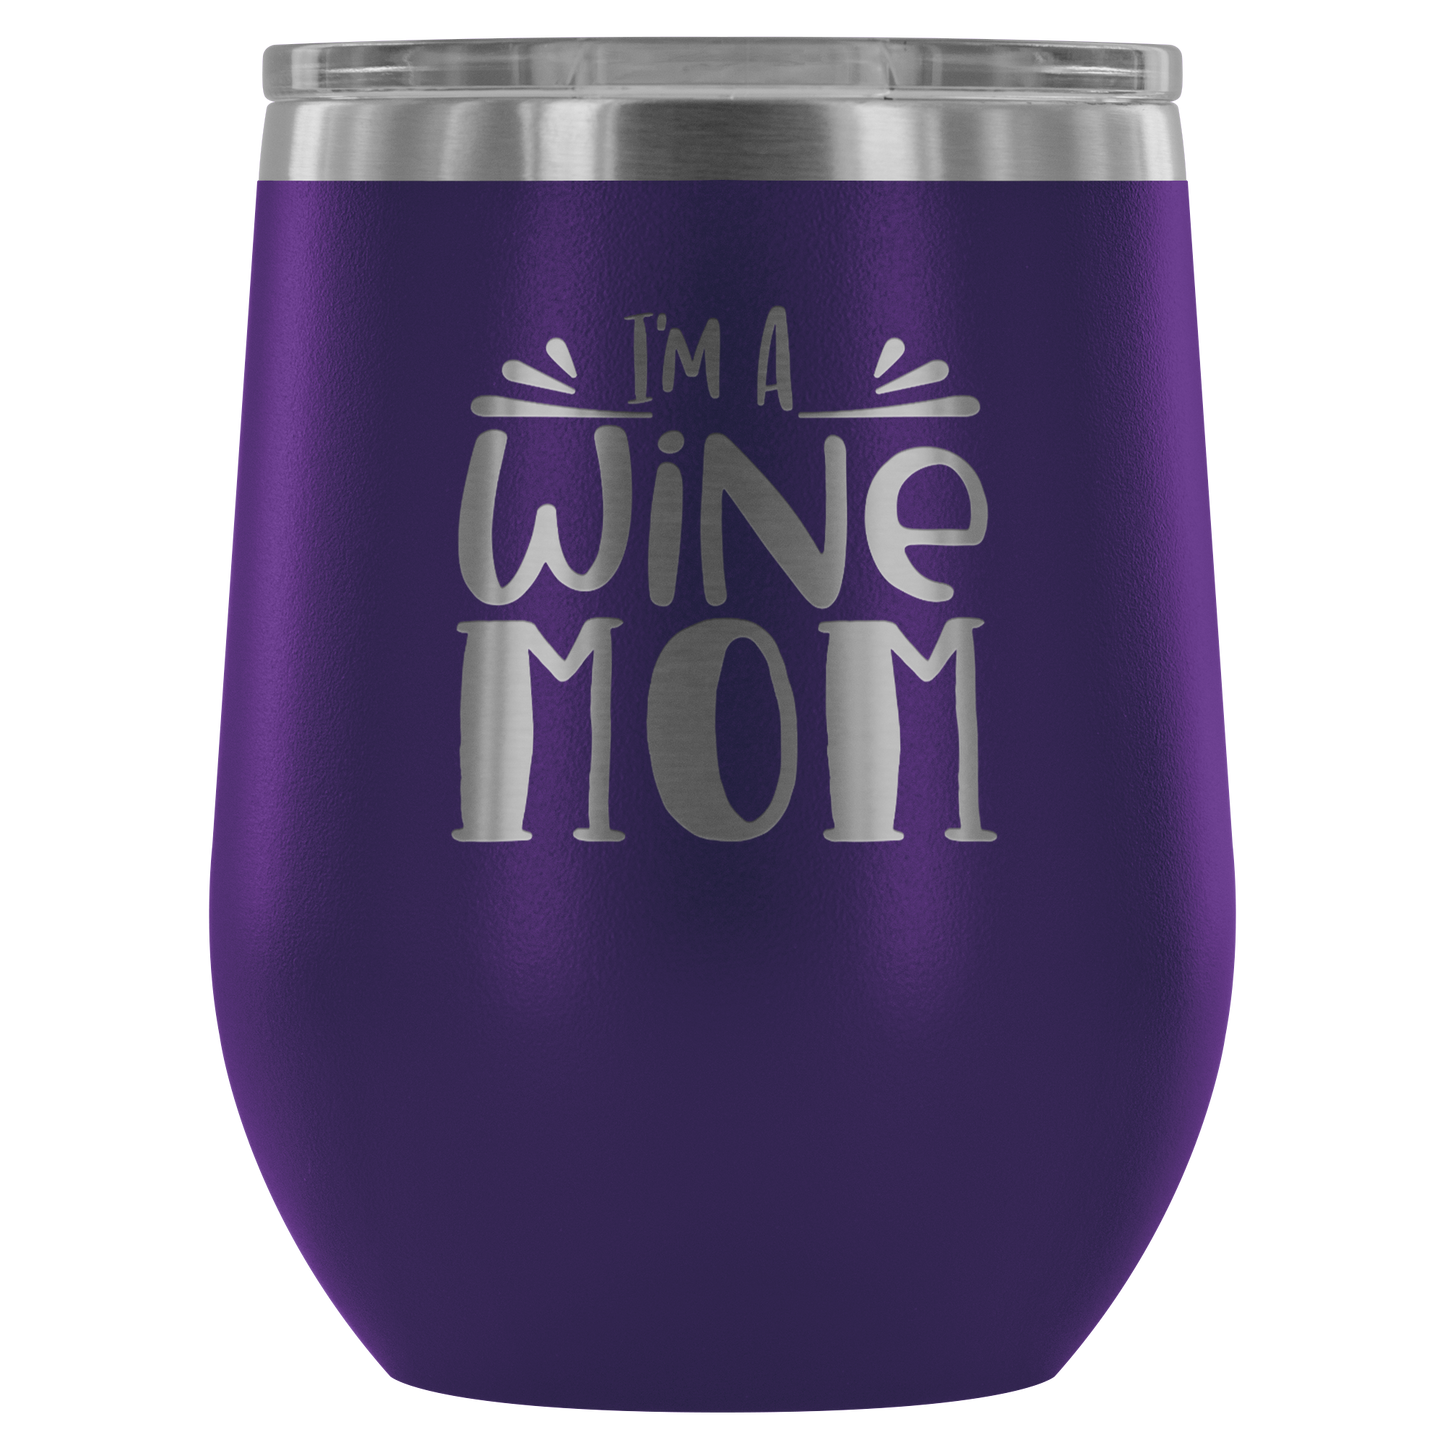 I'm a Wine Mom.... Stemless Wine tumbler 12 oz Stainless steel wine lovers Gift for her